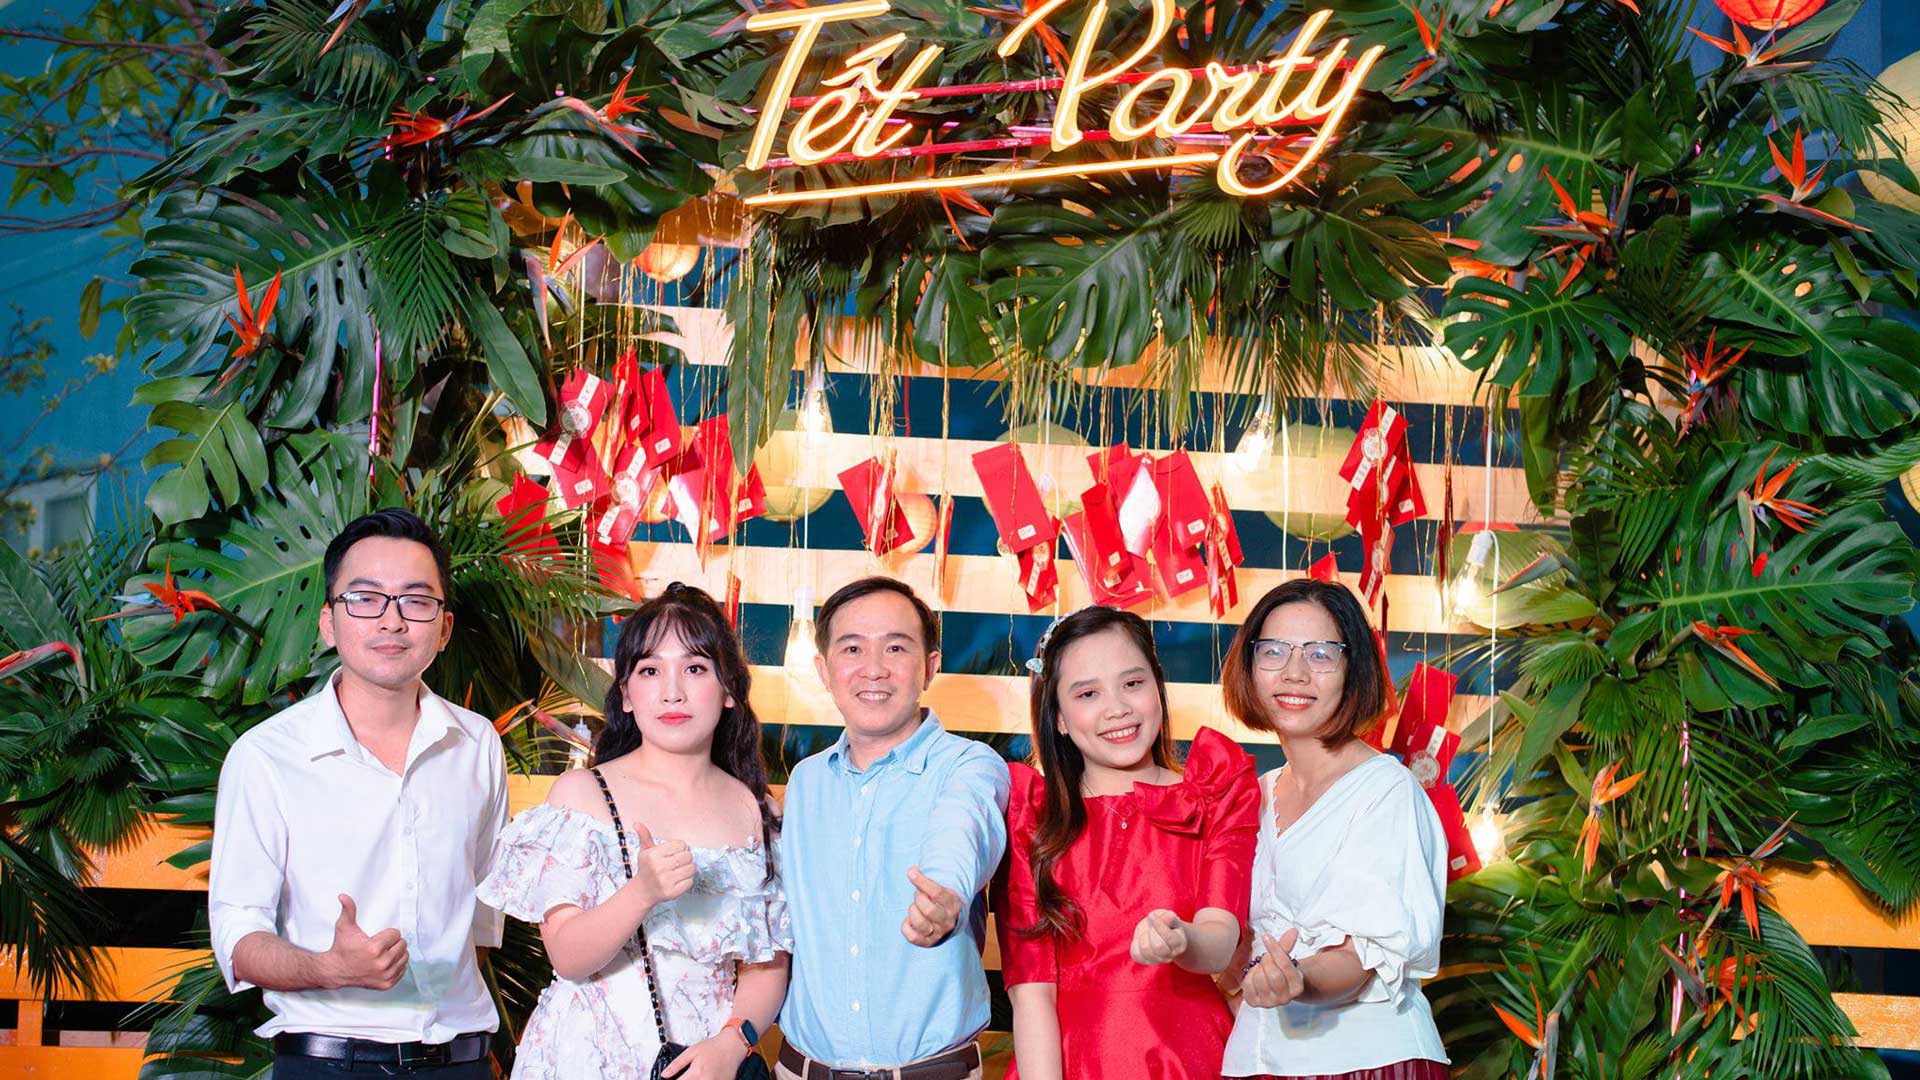 Tết Party 2021: One Connection